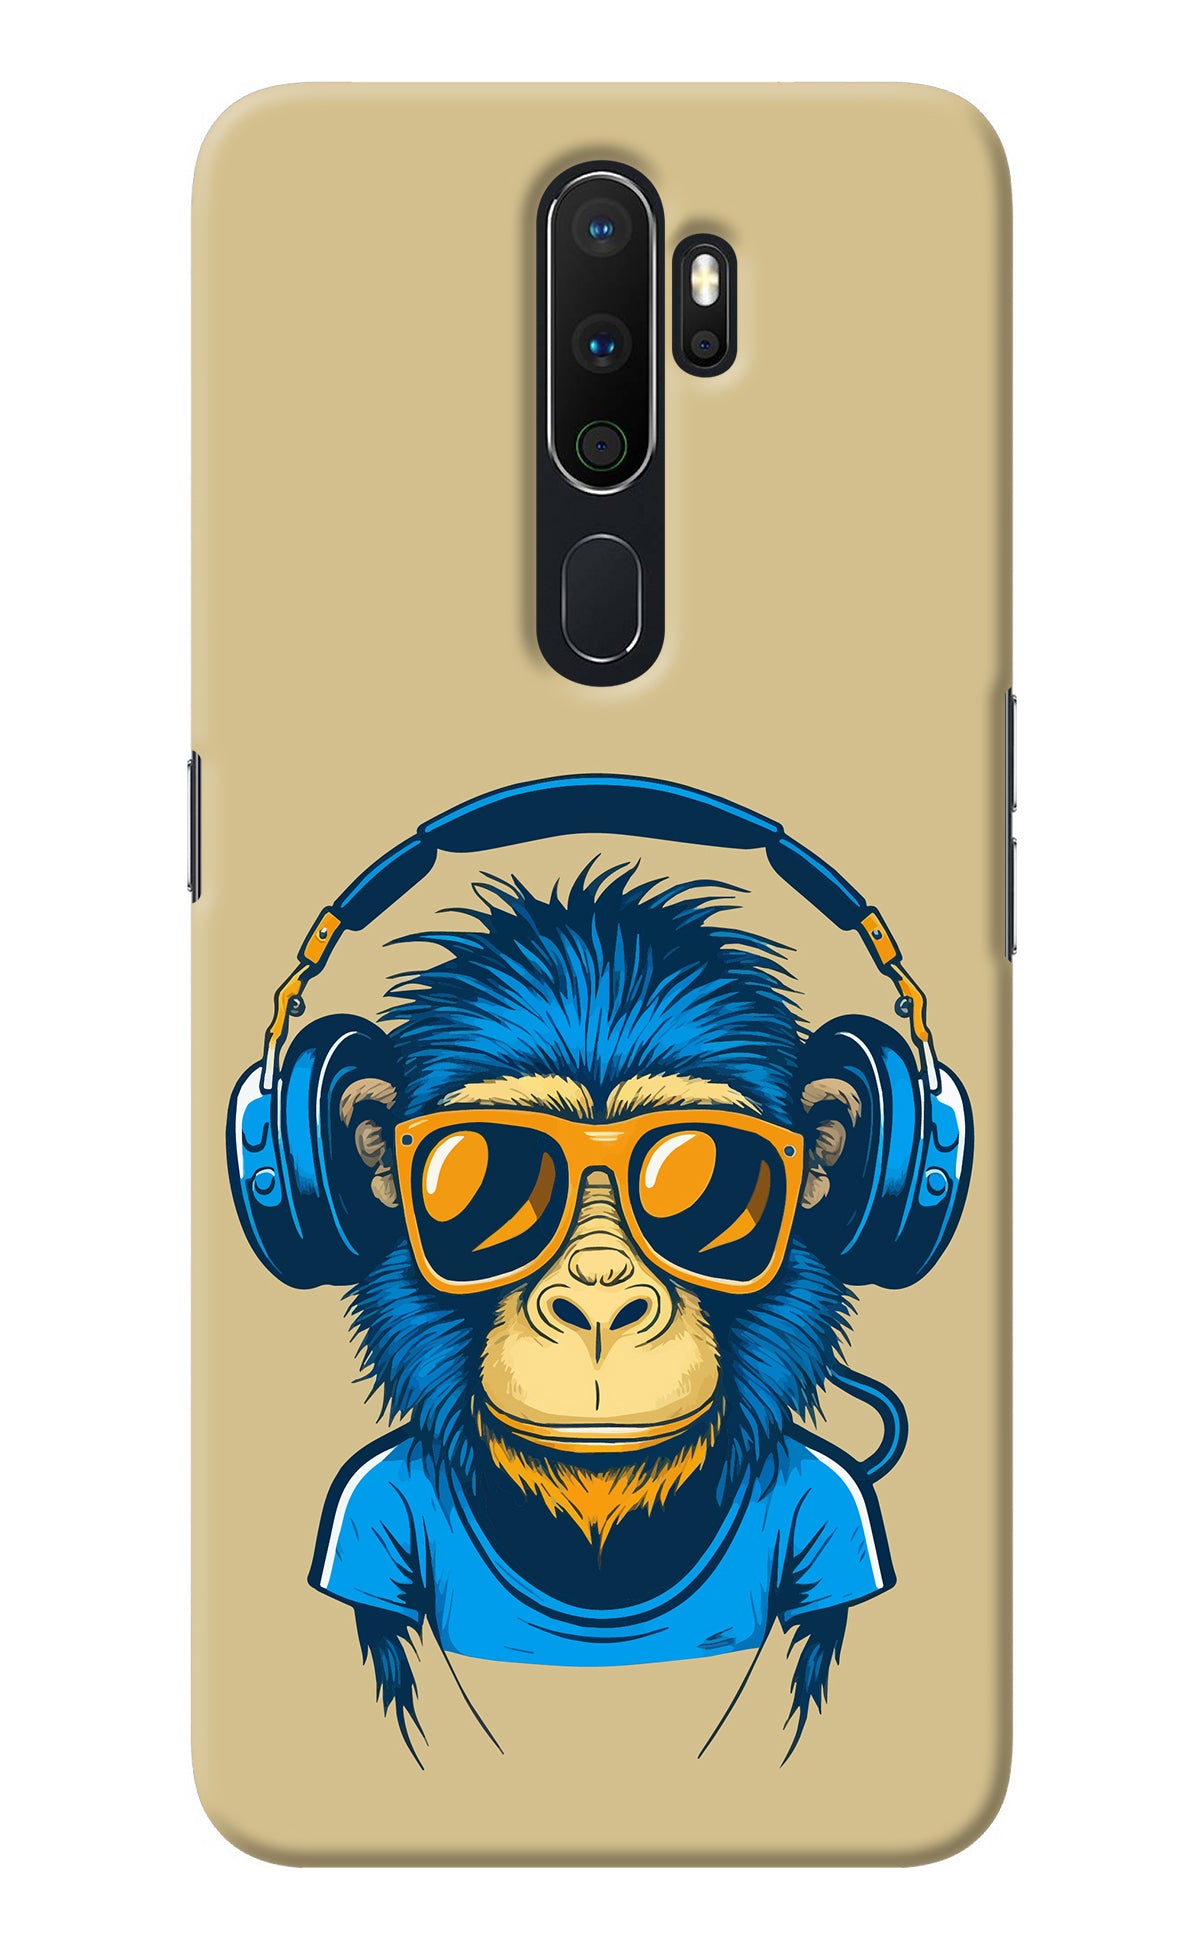 Monkey Headphone Oppo A5 2020/A9 2020 Back Cover